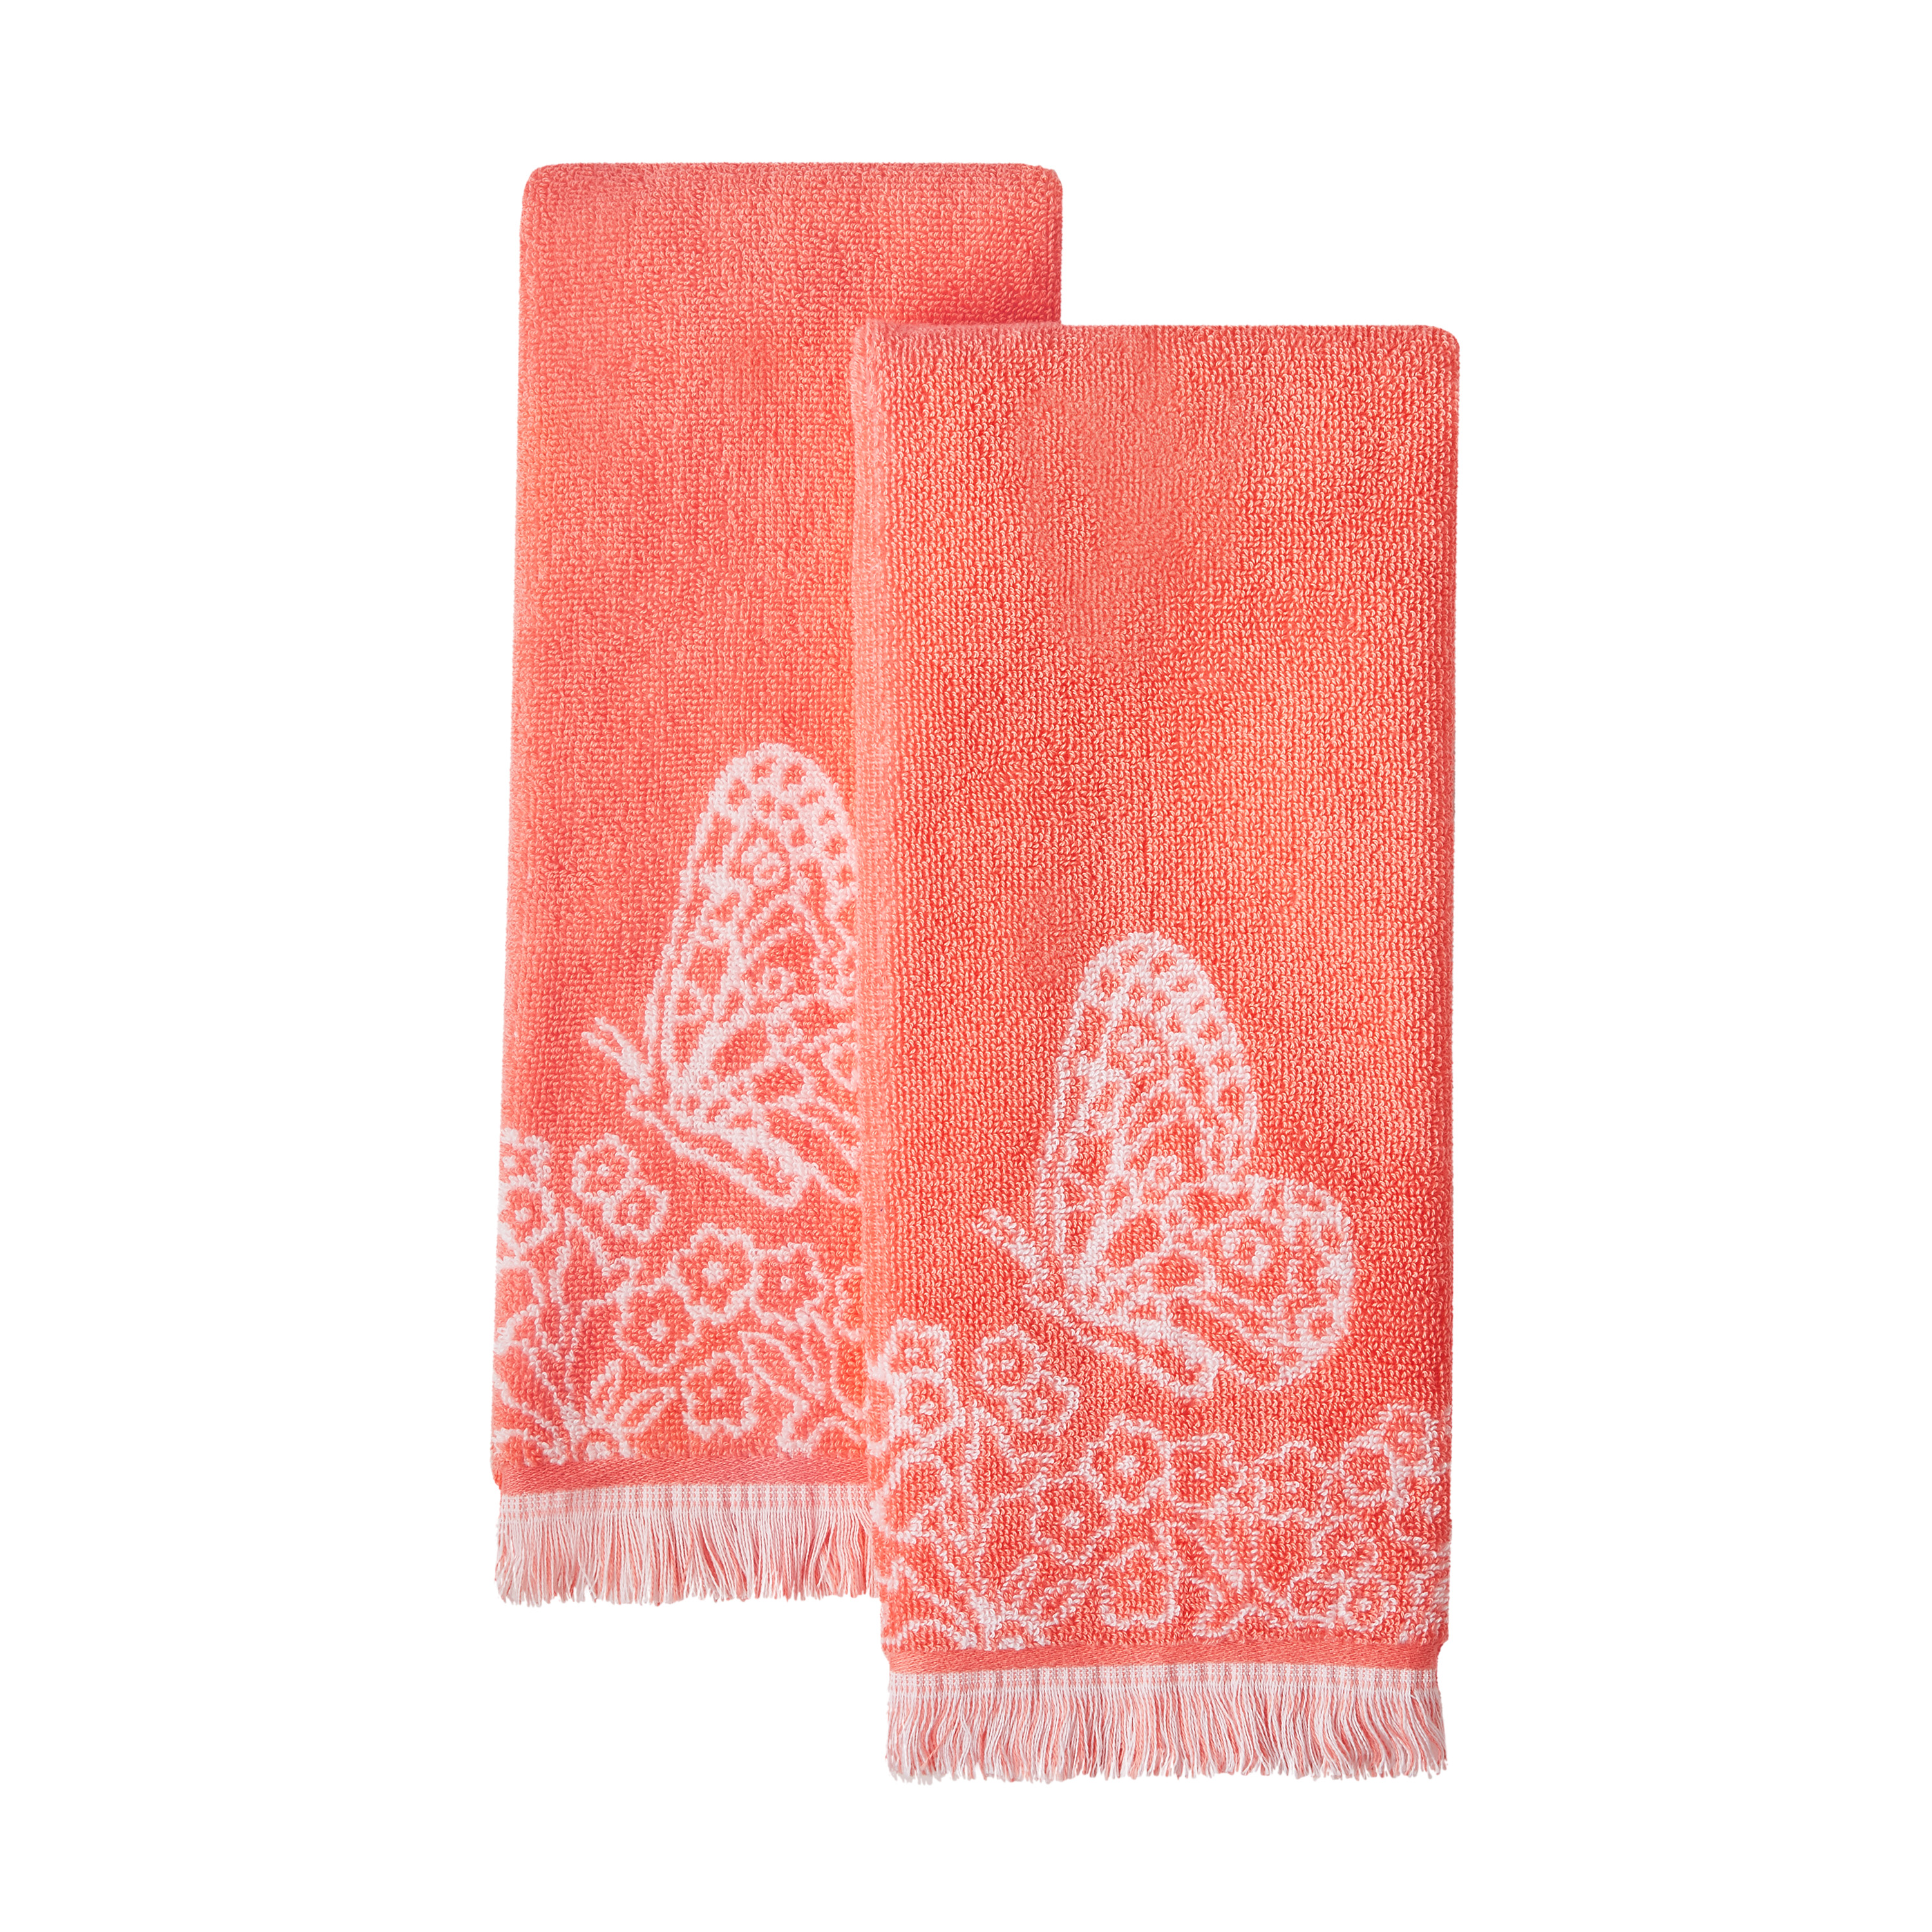 The Pioneer Woman Butterfly Garden 2-Pack Cotton Hand Towel Set, Coral Bell - image 1 of 5